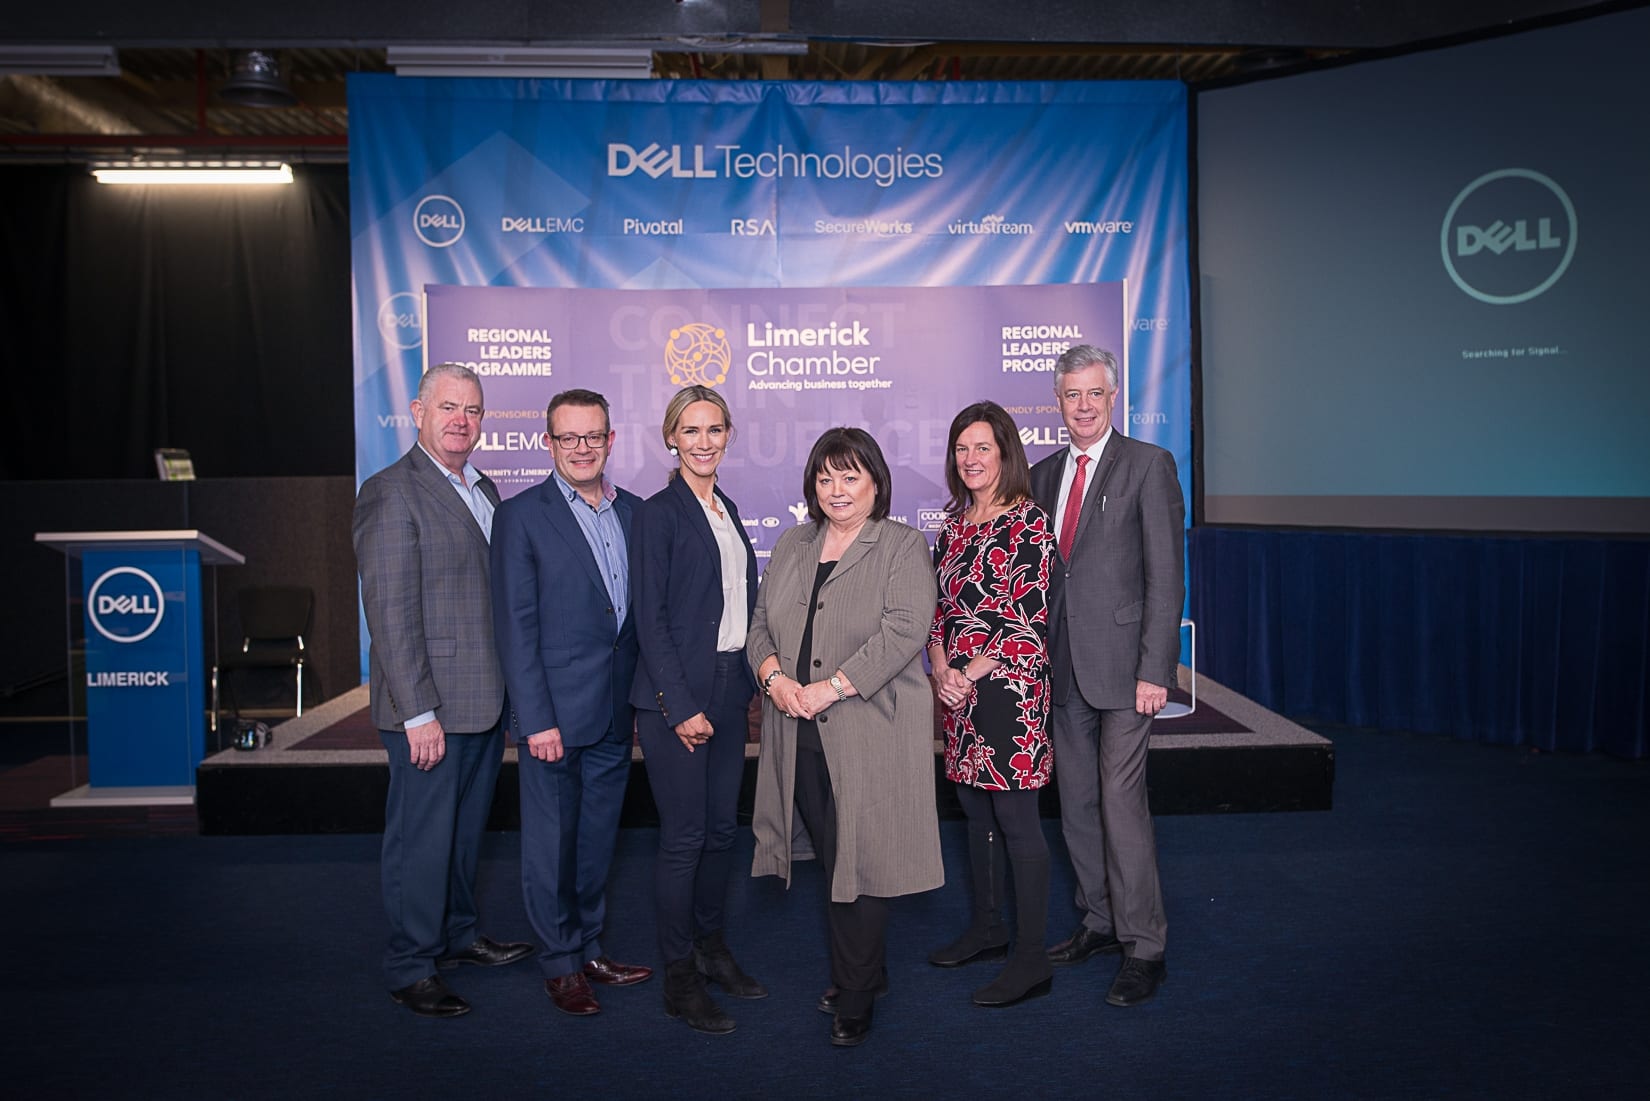 At the Limerick Chamber Regional Leaders programme in Dell, sponsored by Dell EMC, in association with Kemmy Business School UL, was From left to right: Denis Kelly - DELL EMC, Dave Griffin - DELL -Business Development Director at Dell EMC, Dee Ryan - CEO Limerick Chamber, Mary Harney - Chancellor University of Limerick, Dr Mary Shire- President Limerick Chamber Dr Philip O’Regan - Kemmy Business School University of Limerick. Picture by Shauna Kennedy